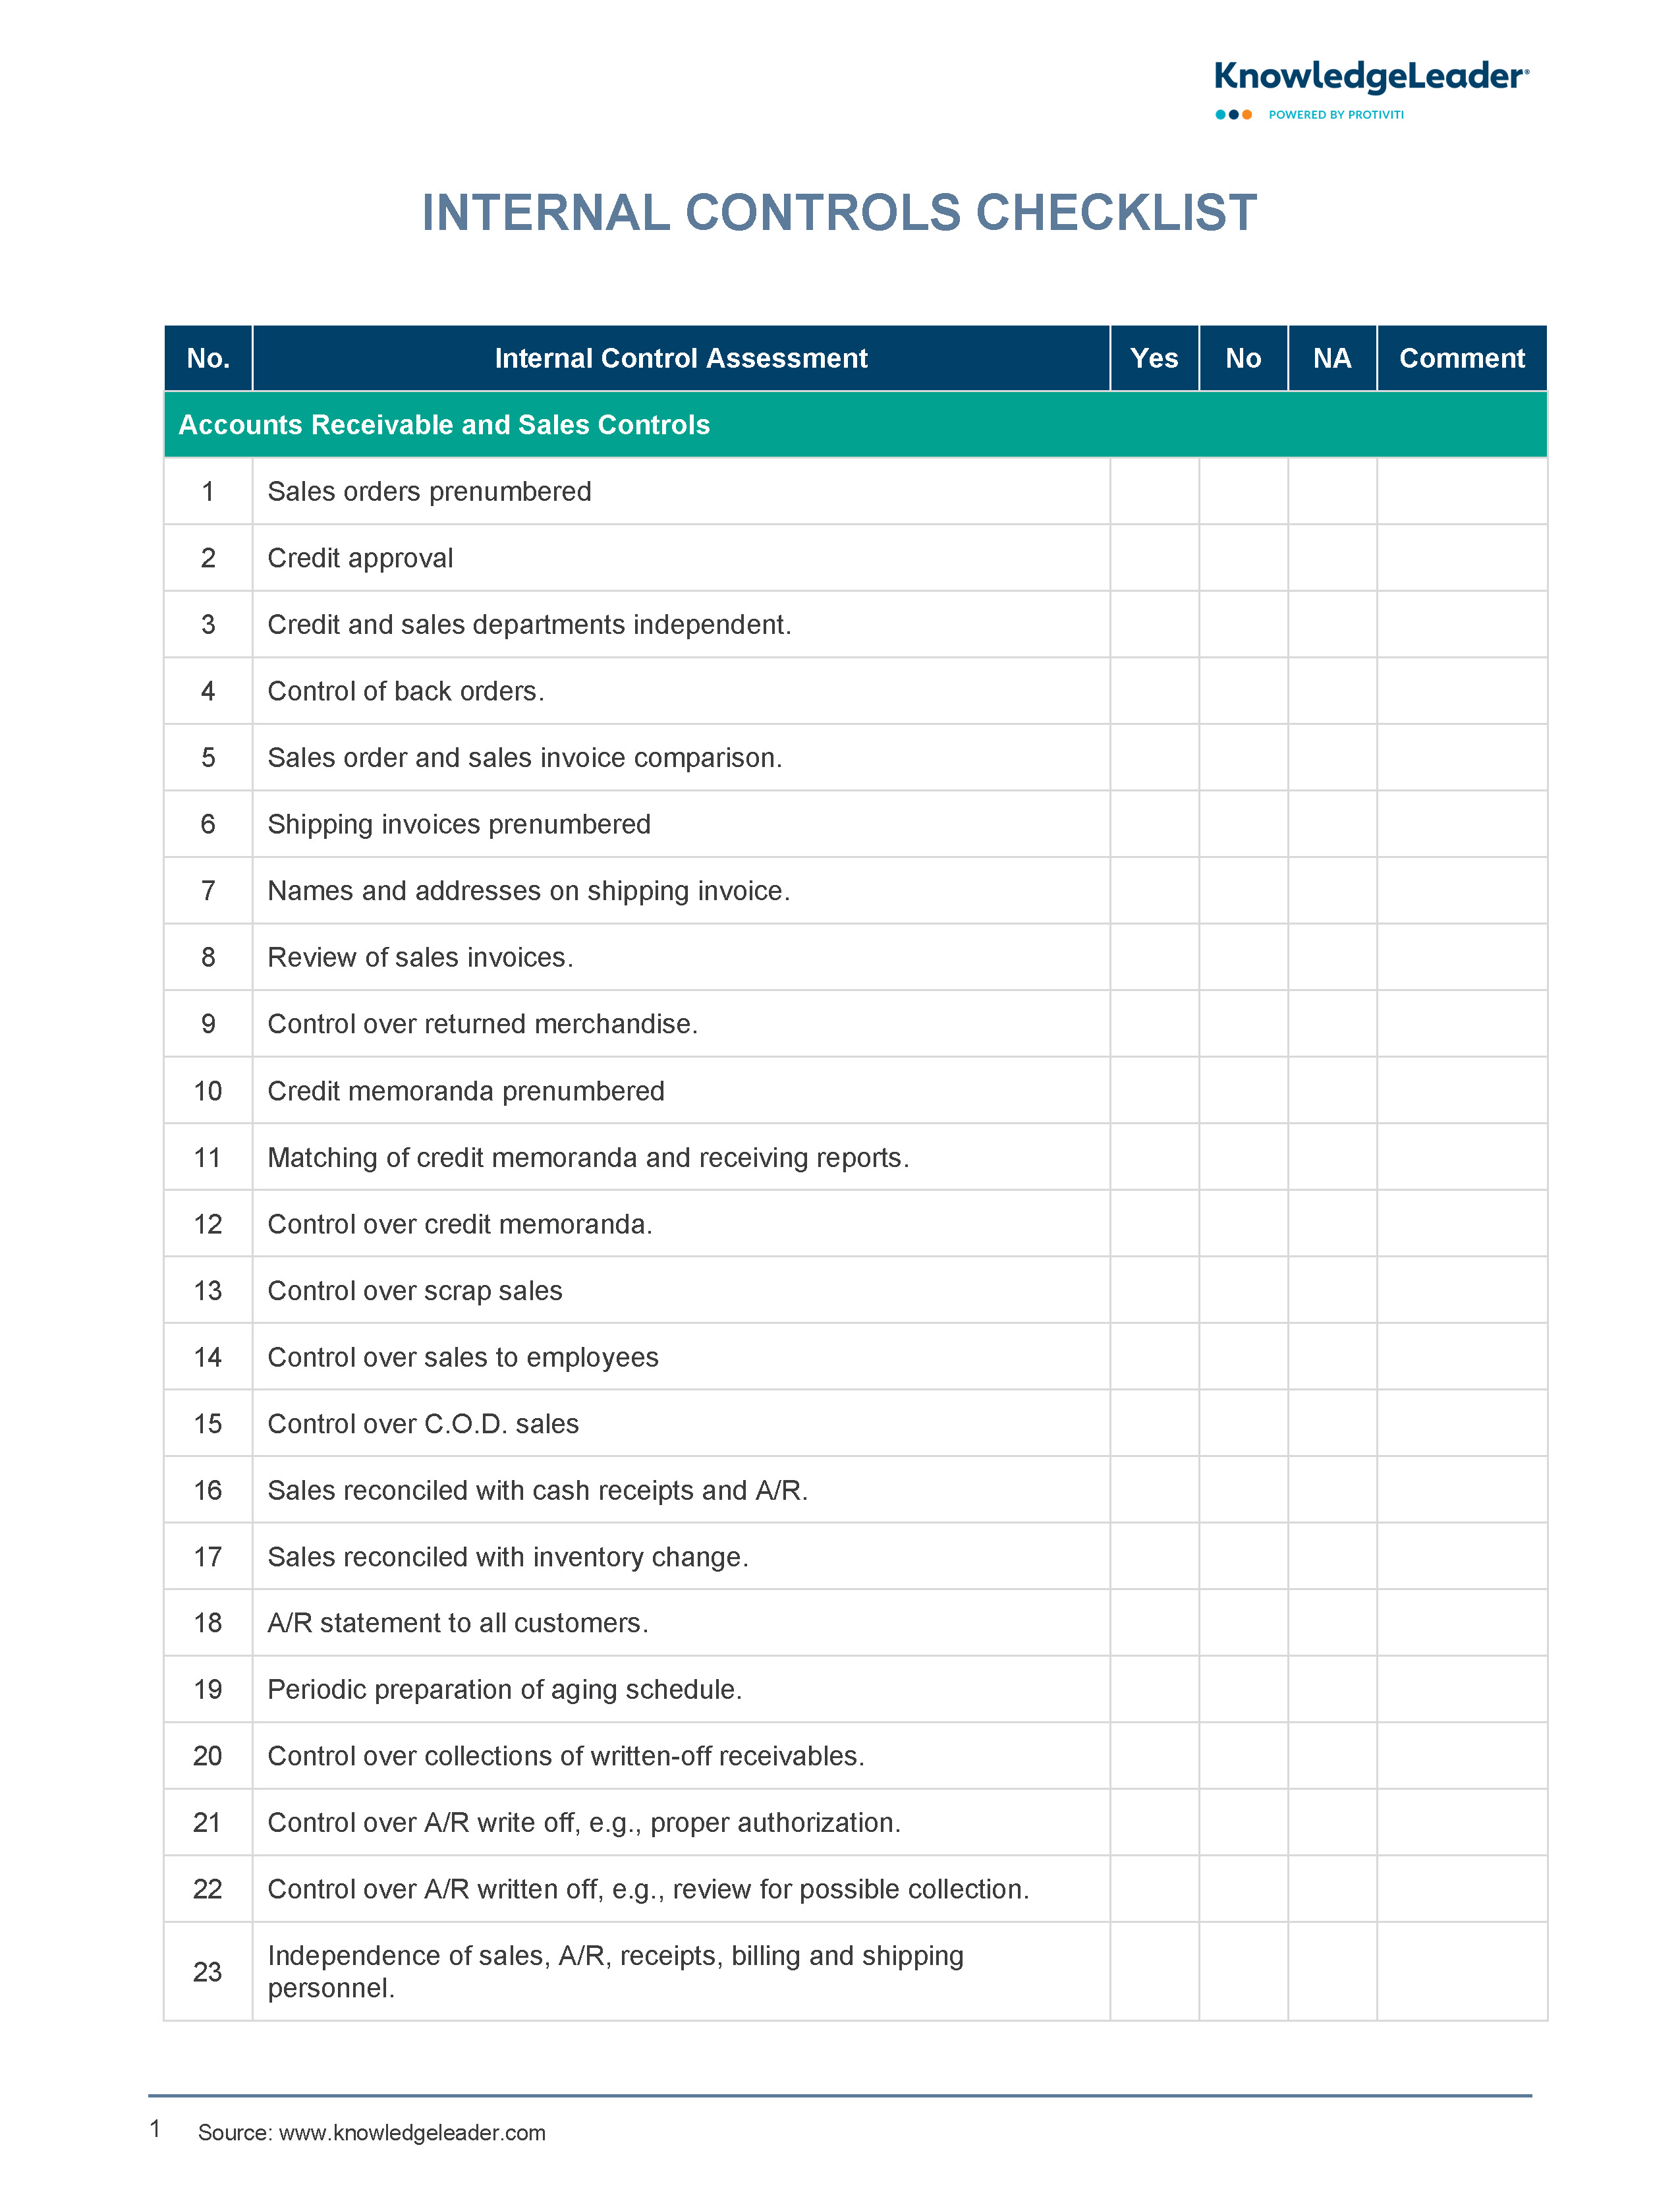 Screenshot of the first page of Internal Controls Checklist